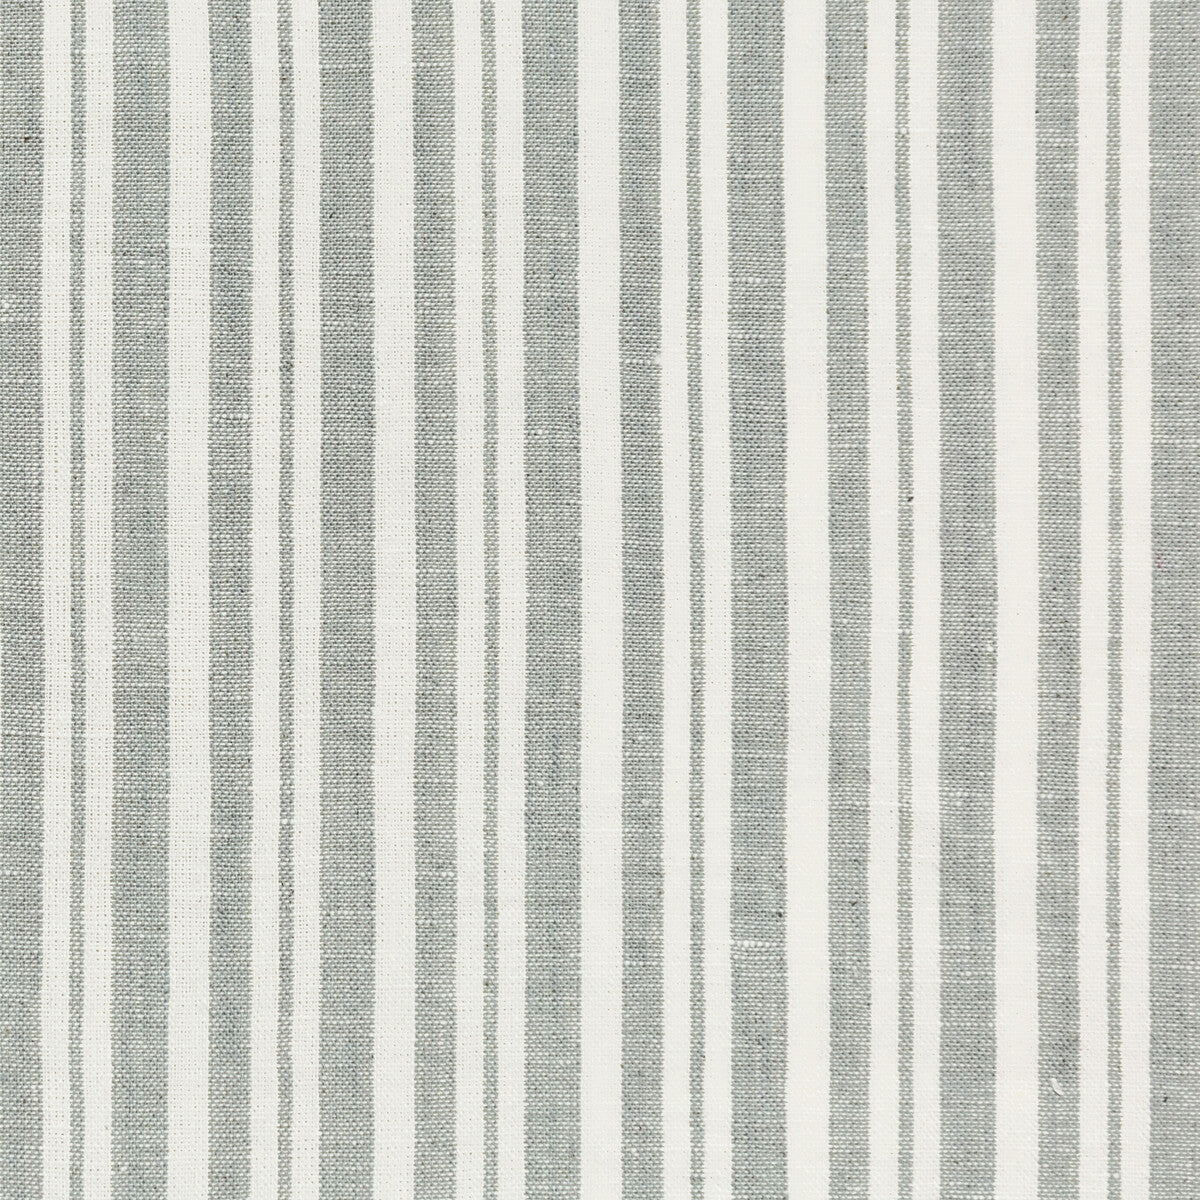 Jaffna fabric in grey color - pattern 35765.11.0 - by Kravet Basics in the Ceylon collection